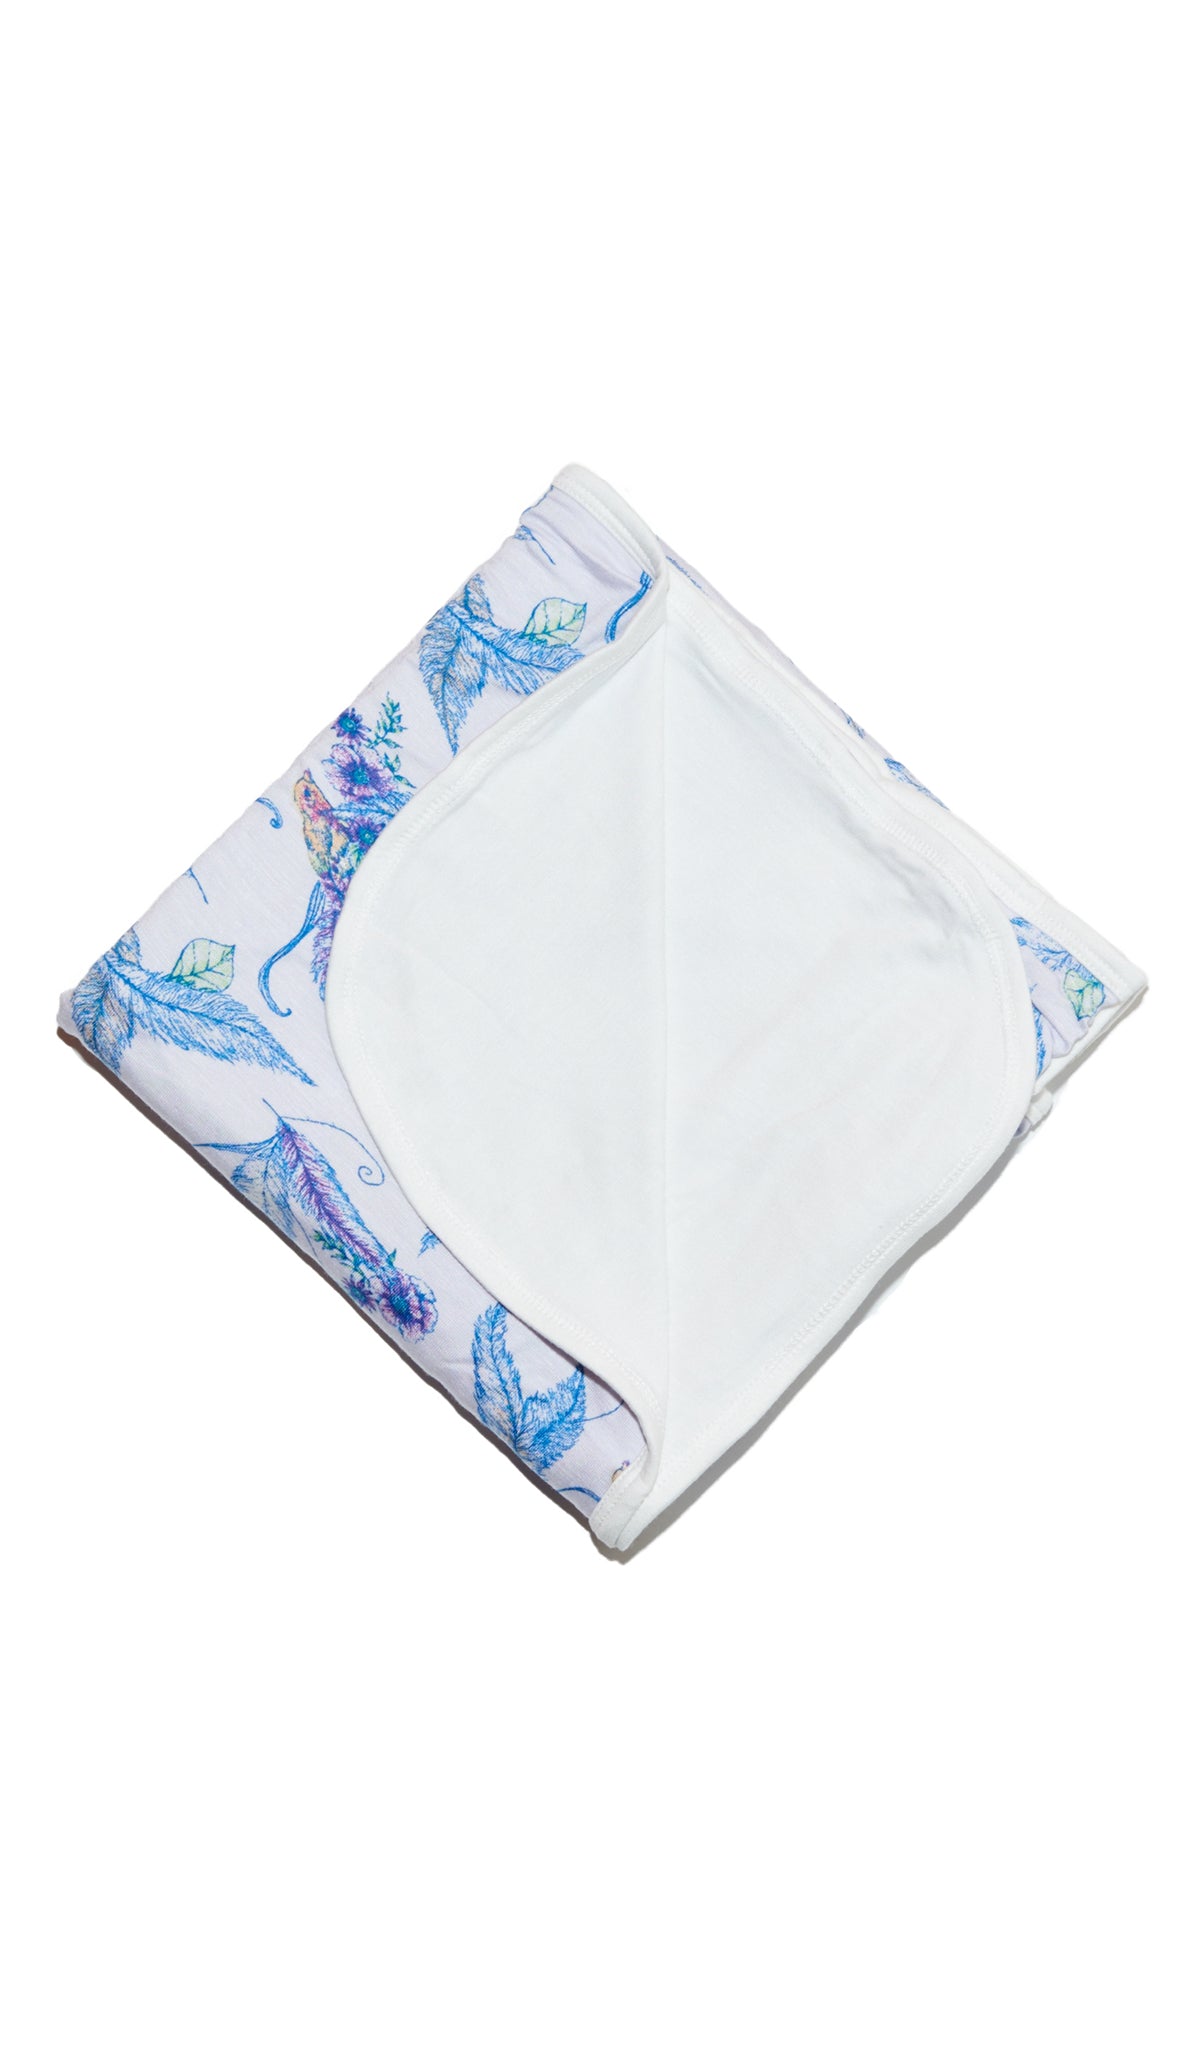 Sparrow Swaddle Blanket folded into a square with print showing on one side and reversible contrast solid showing on other side of fold down flap.